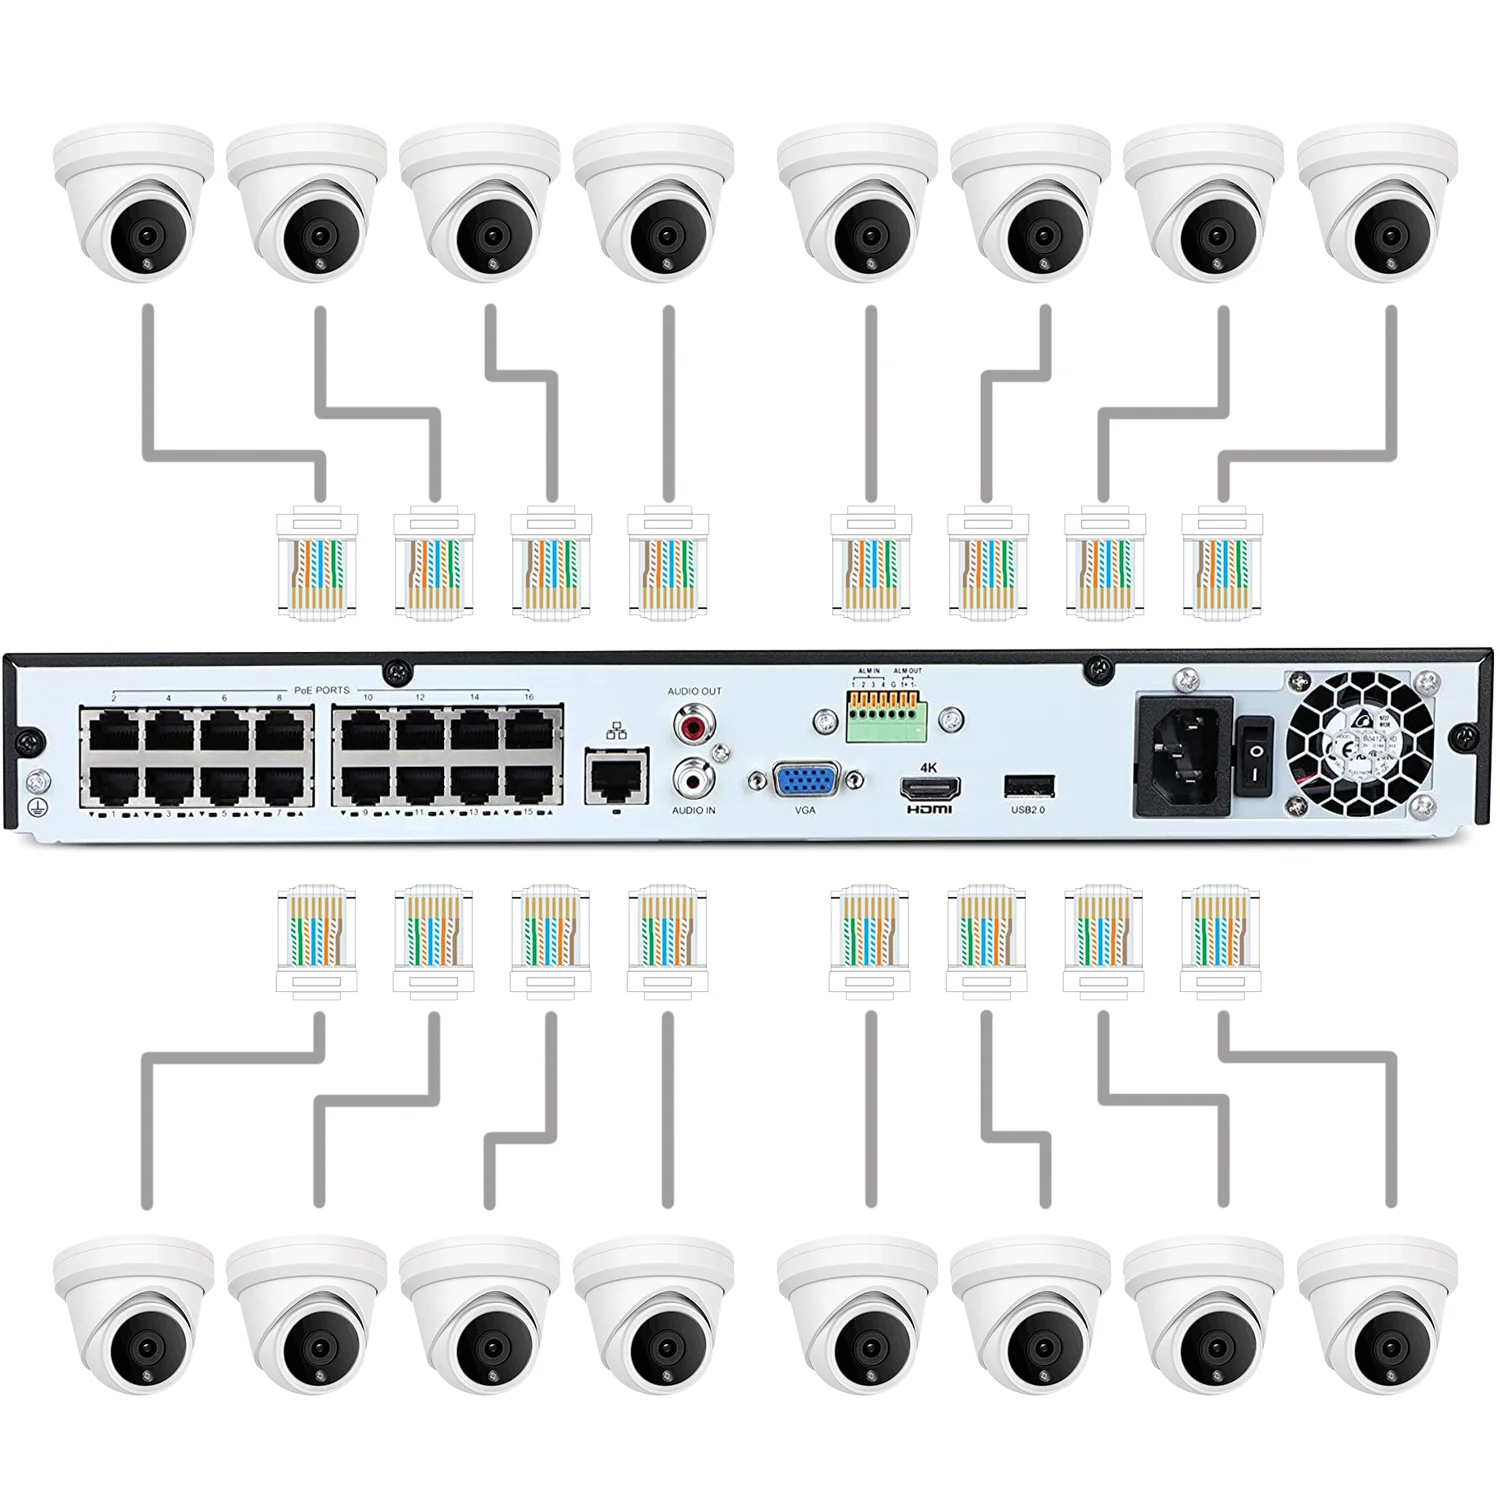 

Uniview customized H.265 16CH 4K 8MP NVR with 16chs POE Ports,with 2 SATA HDD slots